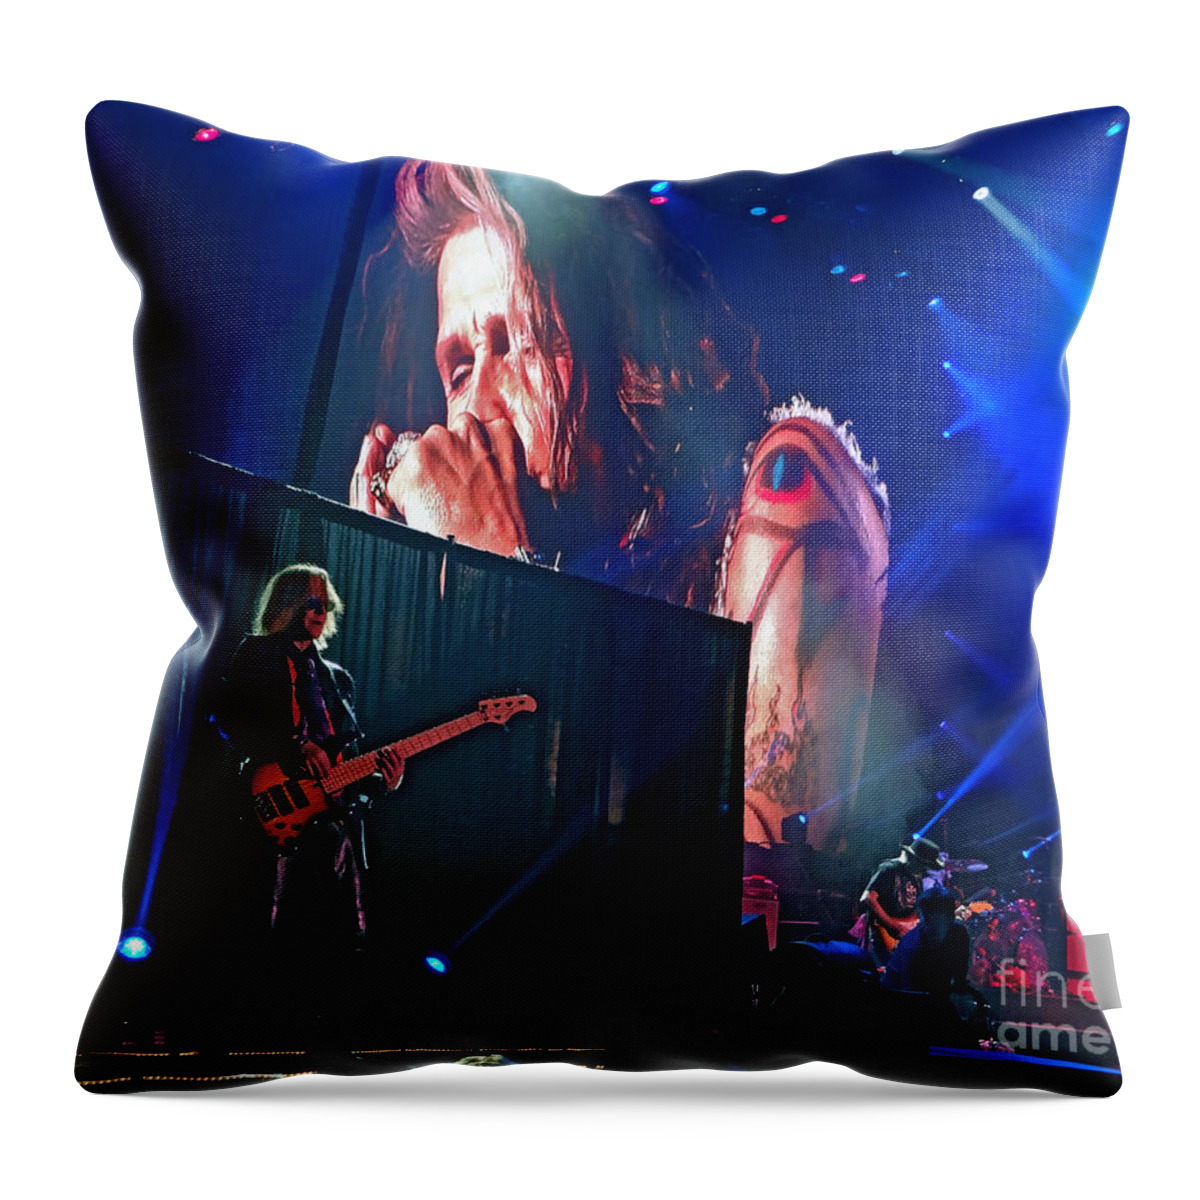 Digital Photography Throw Pillow featuring the photograph Dream On. Aerosmith Live by Tanya Filichkin